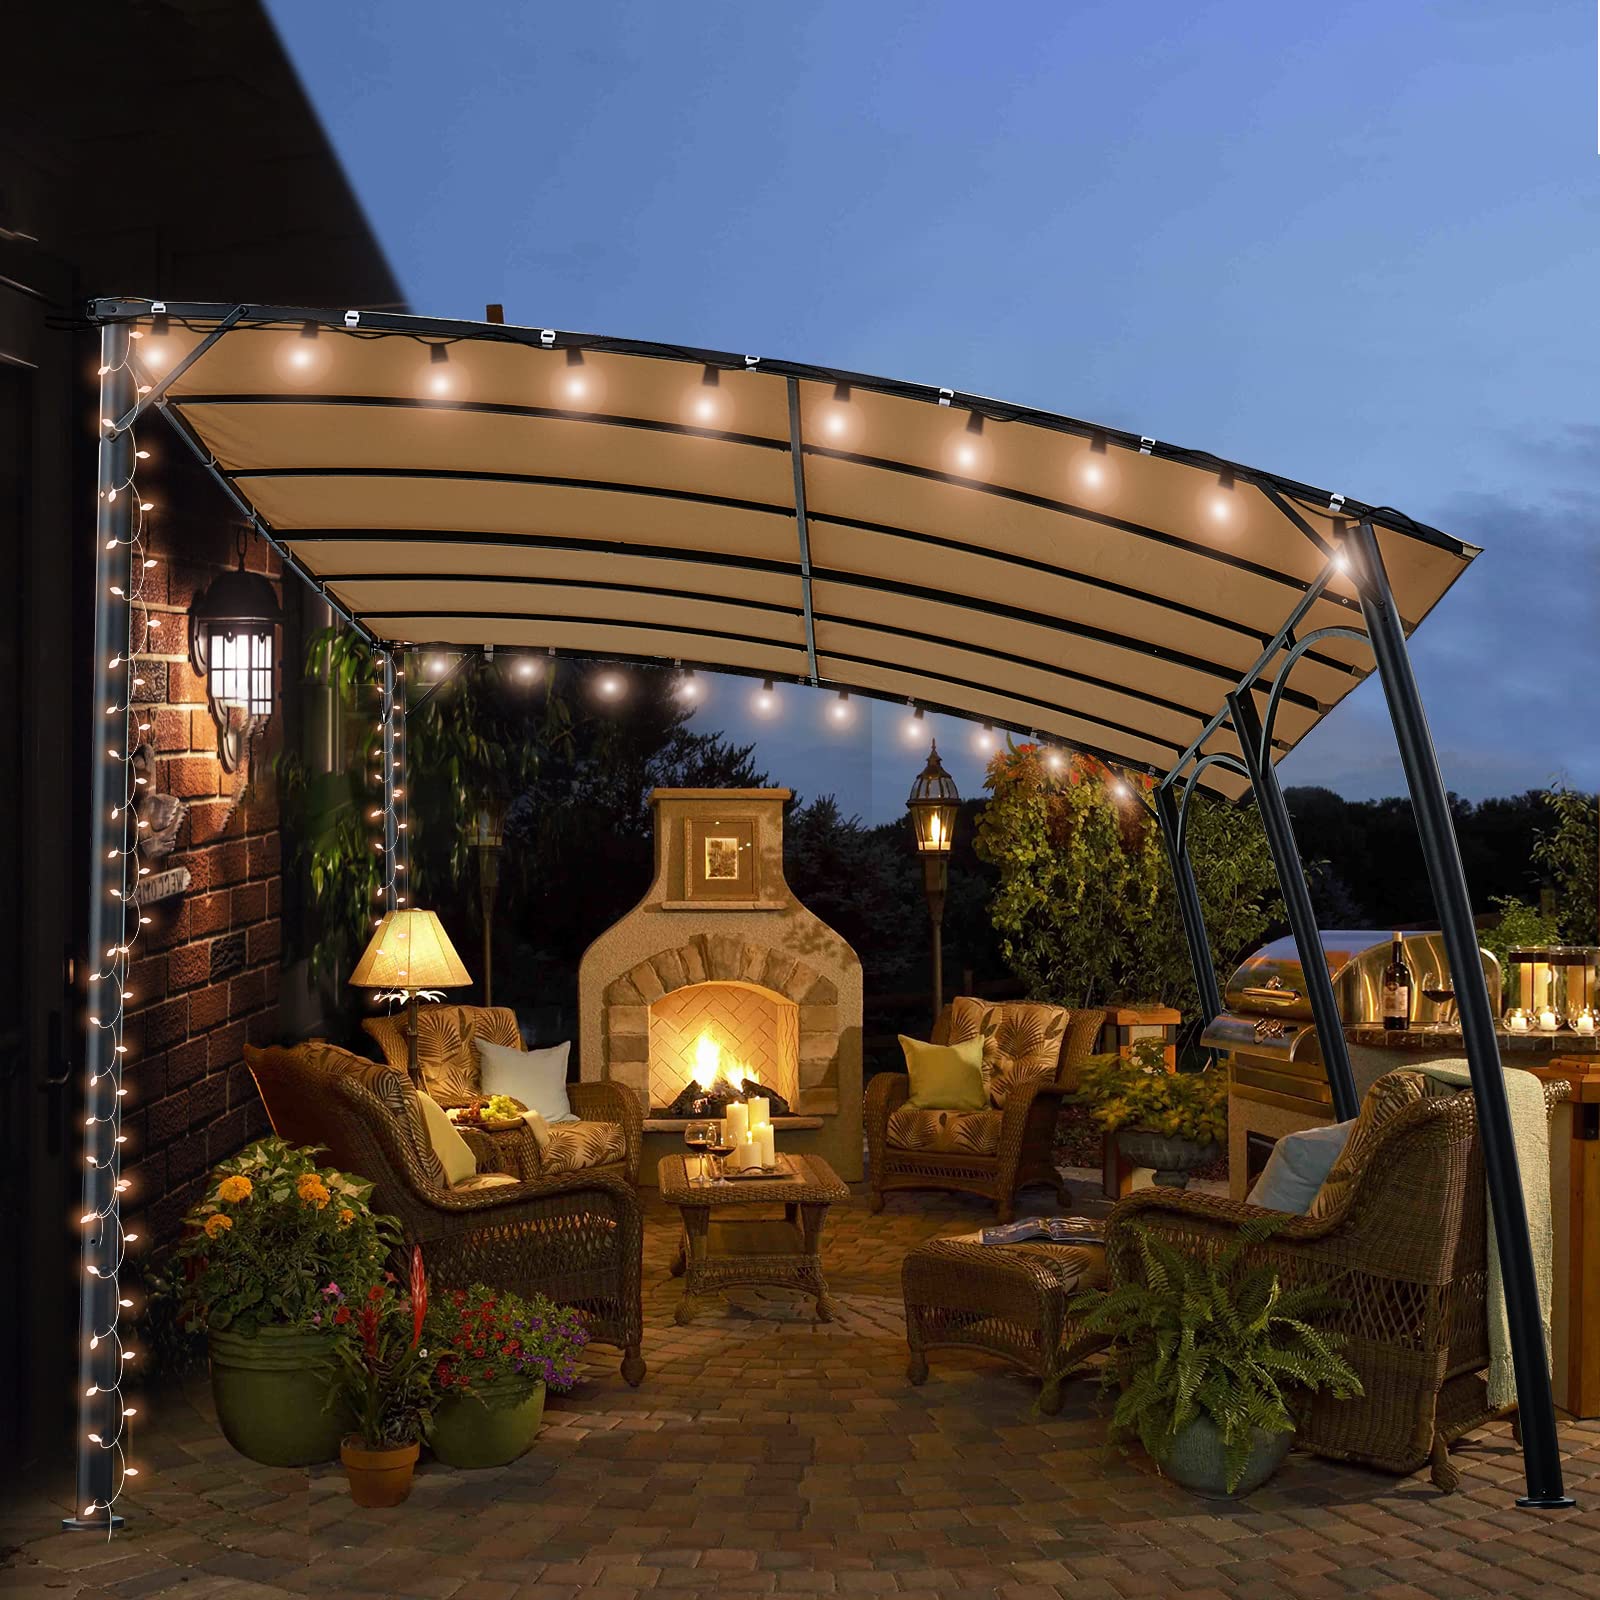 AECOJOY 13'x10' Sun Shade ,Wall Canopy Sunsetter Deck Awning Gazebo with Steel Stand,Outdoor Free Standing, for Porch,Patio,Backyard,Beige